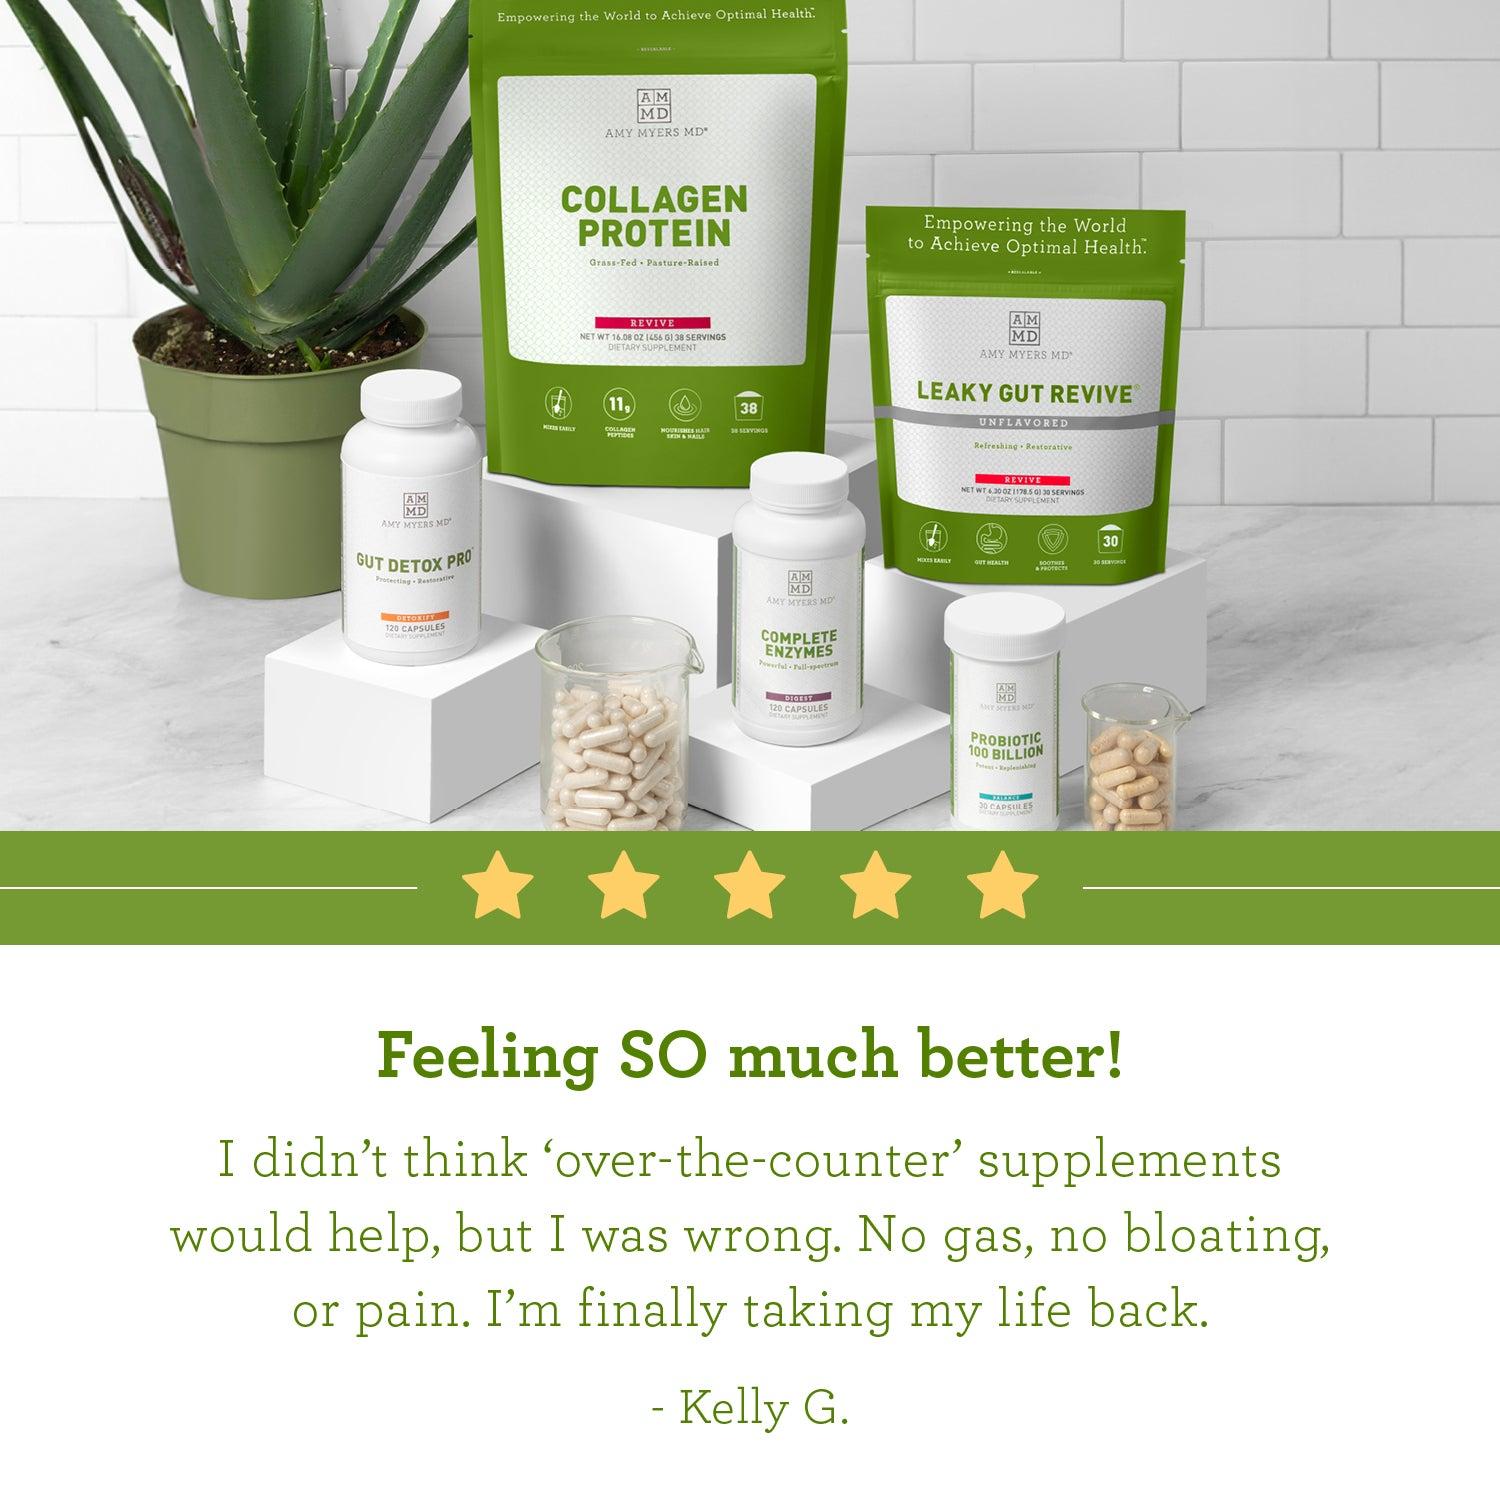 Product review: "Feeling SO much better! I didn't think 'over-the-counter' supplements would help, but I was wrong. No gas, no bloating, or pain. I'm finally taking my life back." -Kelly G